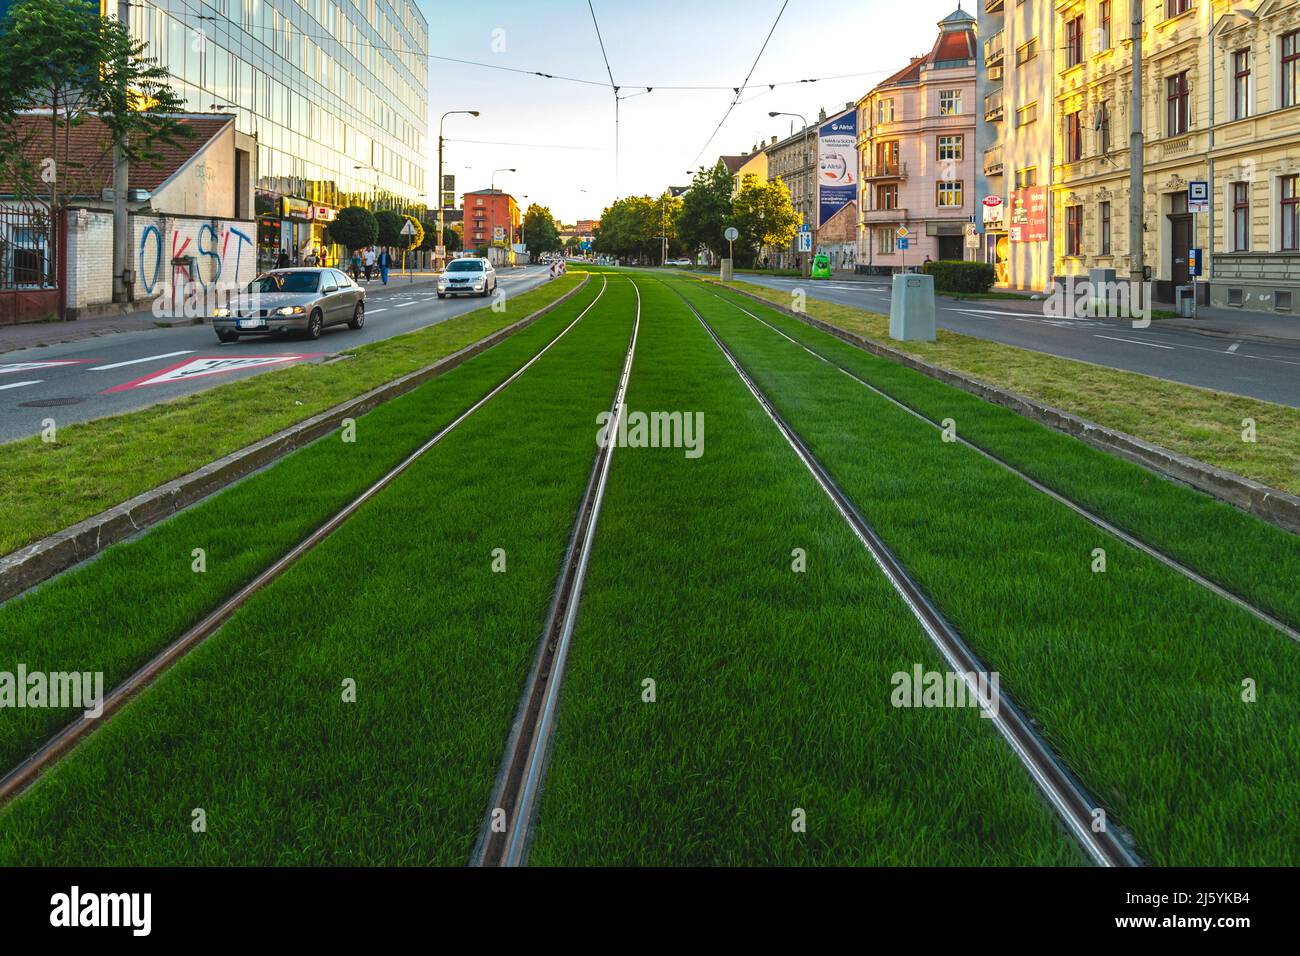 BRNO, Czech Republic - September, 5. 2020:Green track. Grass covered tramway track. Greenery in the city. Habitable zone reduce urban heat. Island Stock Photo